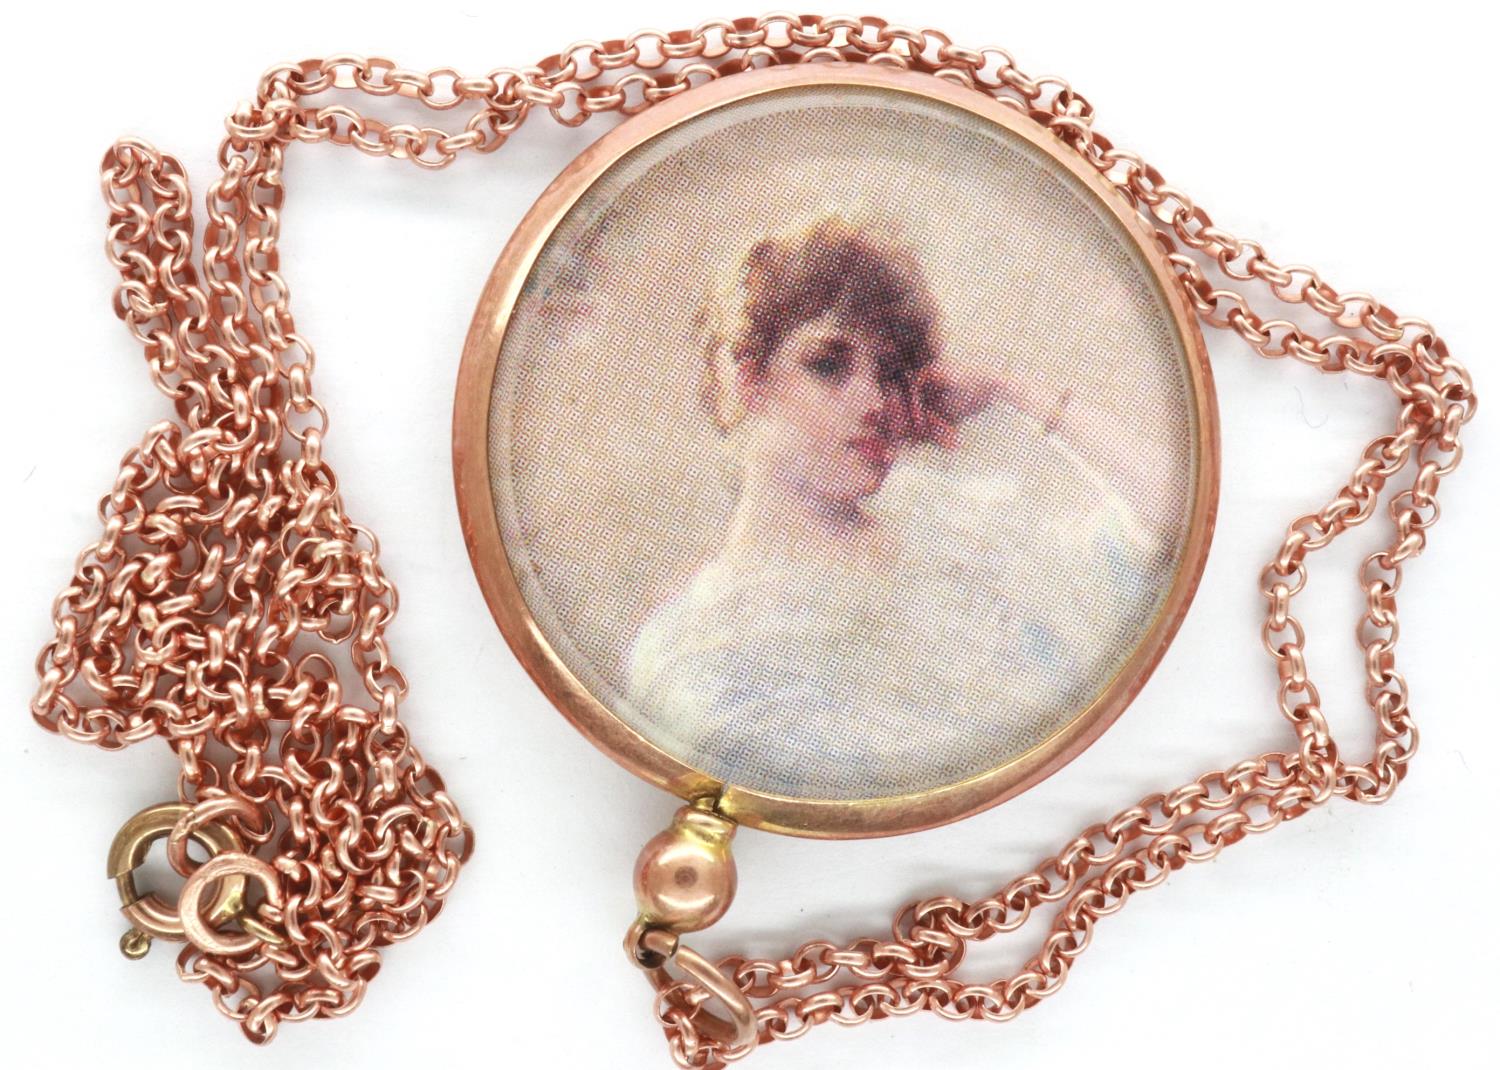 9ct rose gold pendant necklace featuring a portrait of a young lady, chain L: 54 cm, 3.2g. P&P Group